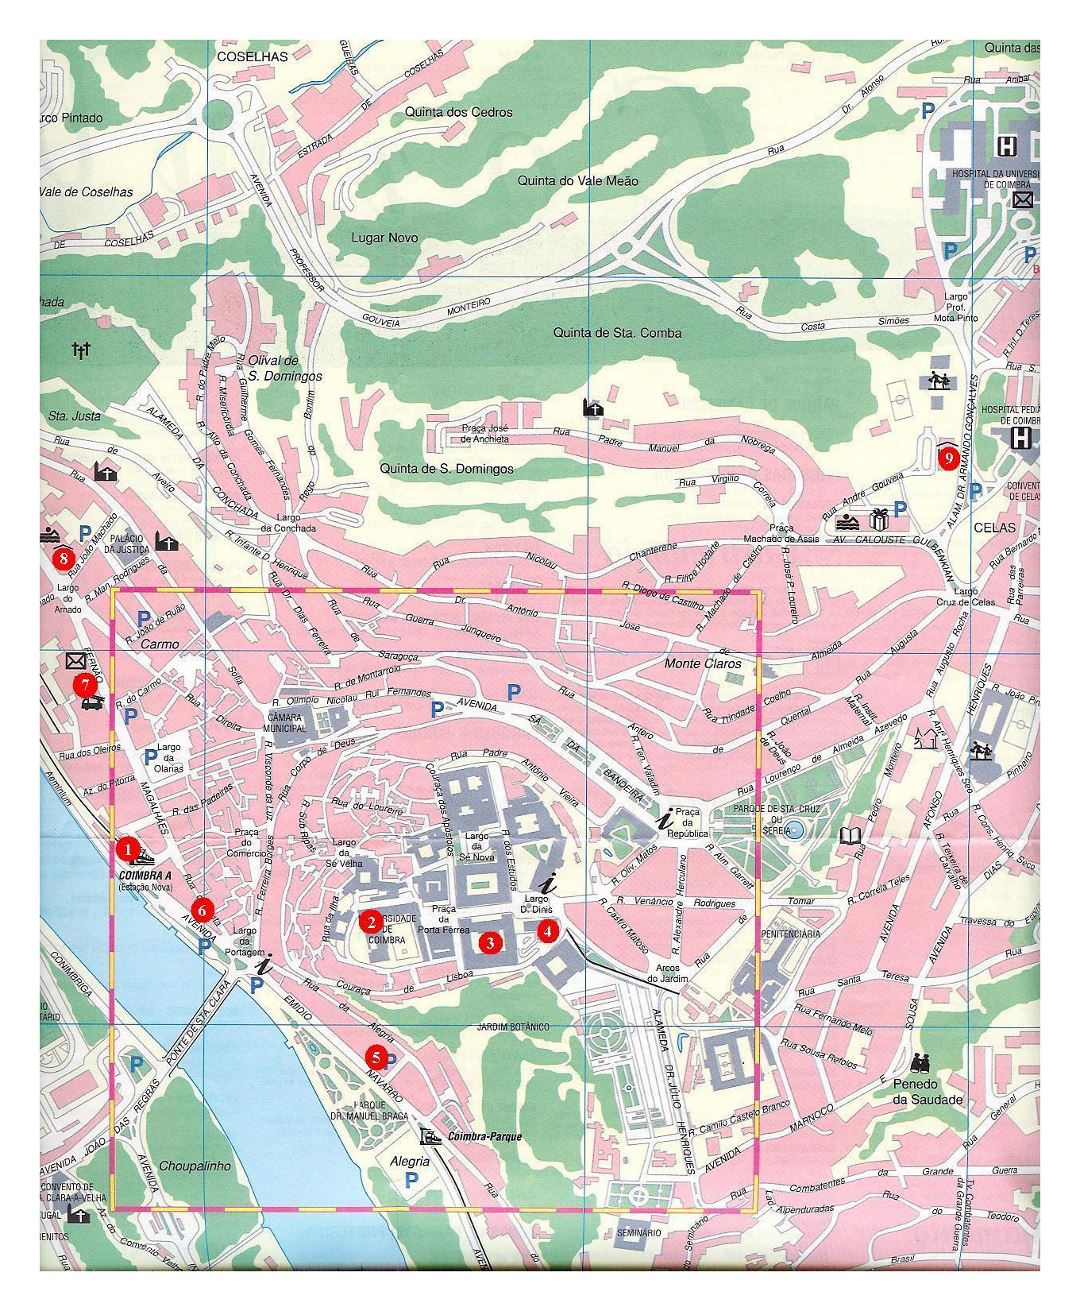 Large travel map of Coimbra city